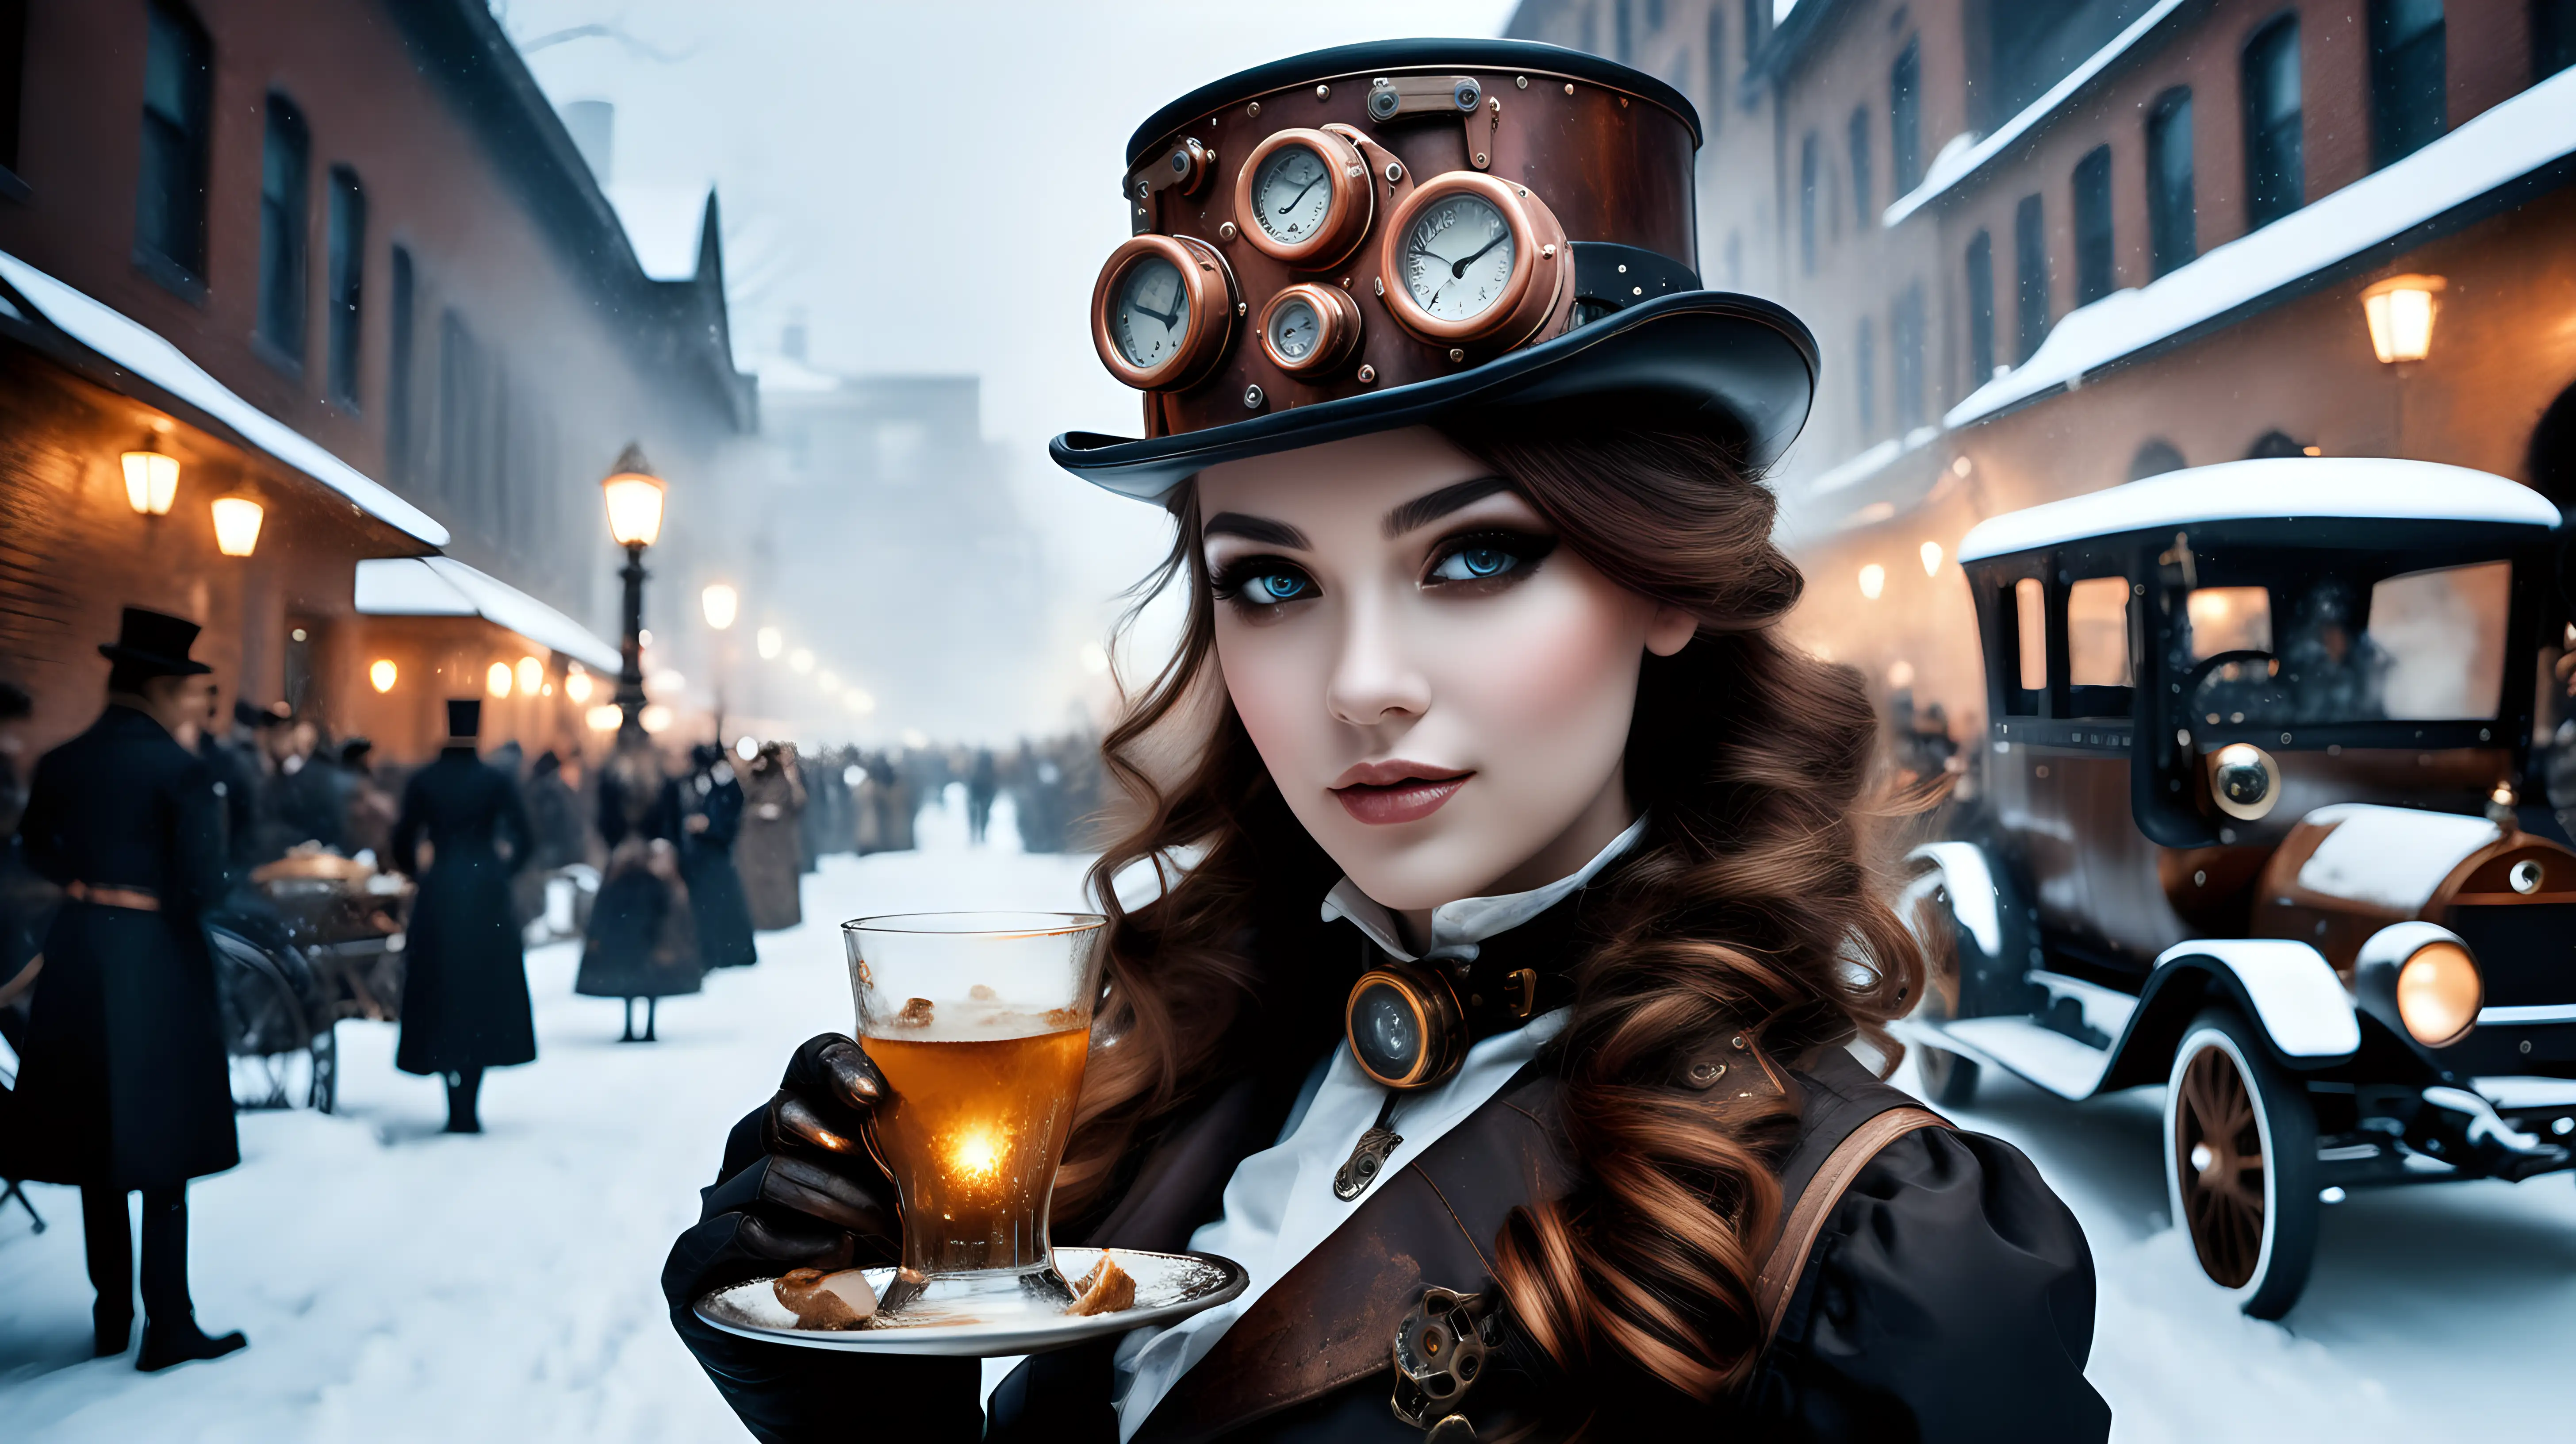 Photo real face_Steampunk willd street party beauty face  toast steam cars winter snow darkness soft light